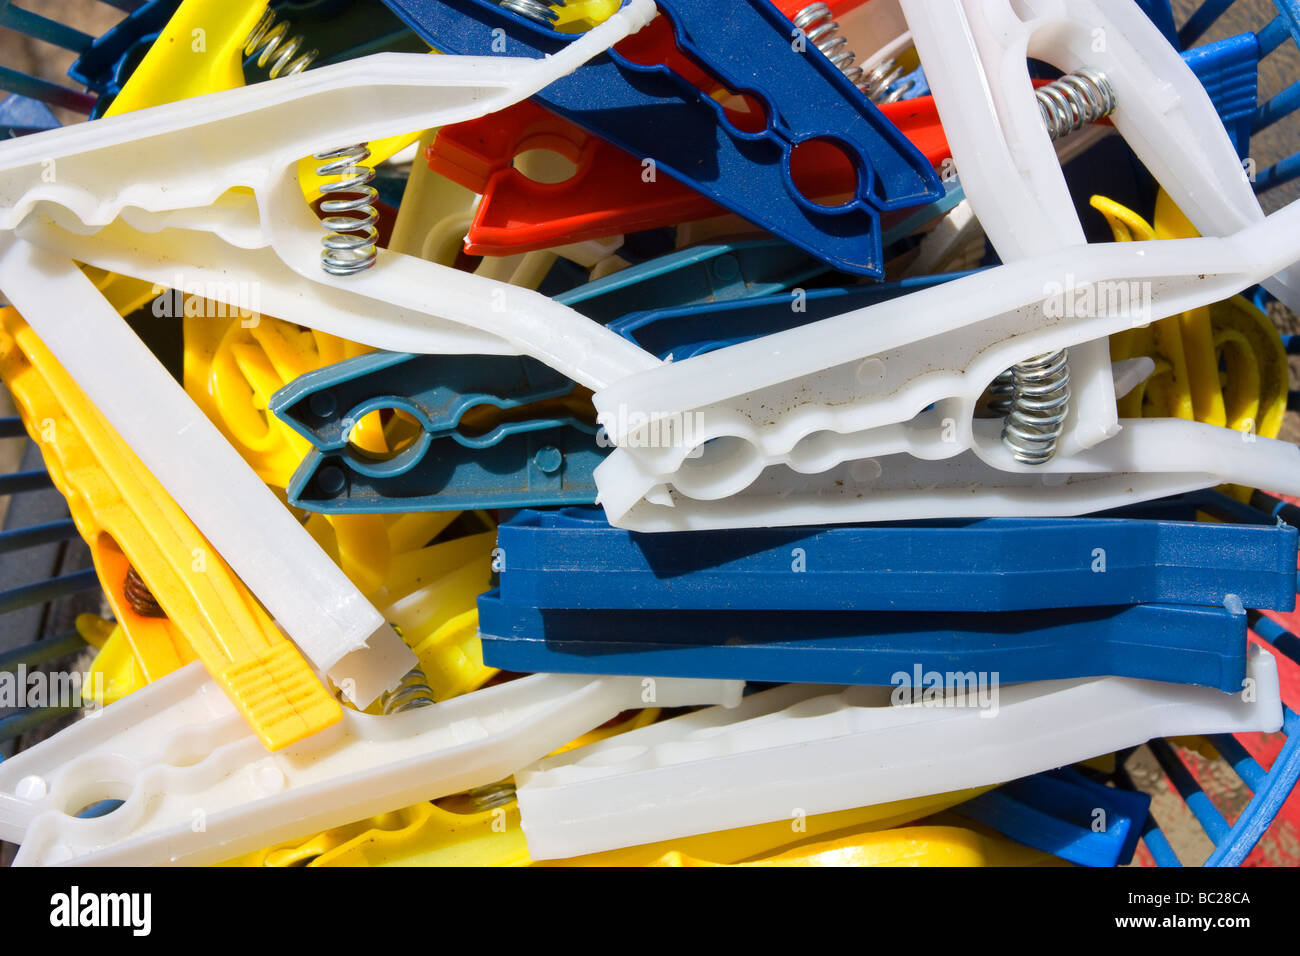 Cheap plastic clothes pegs in plastic basket Stock Photo